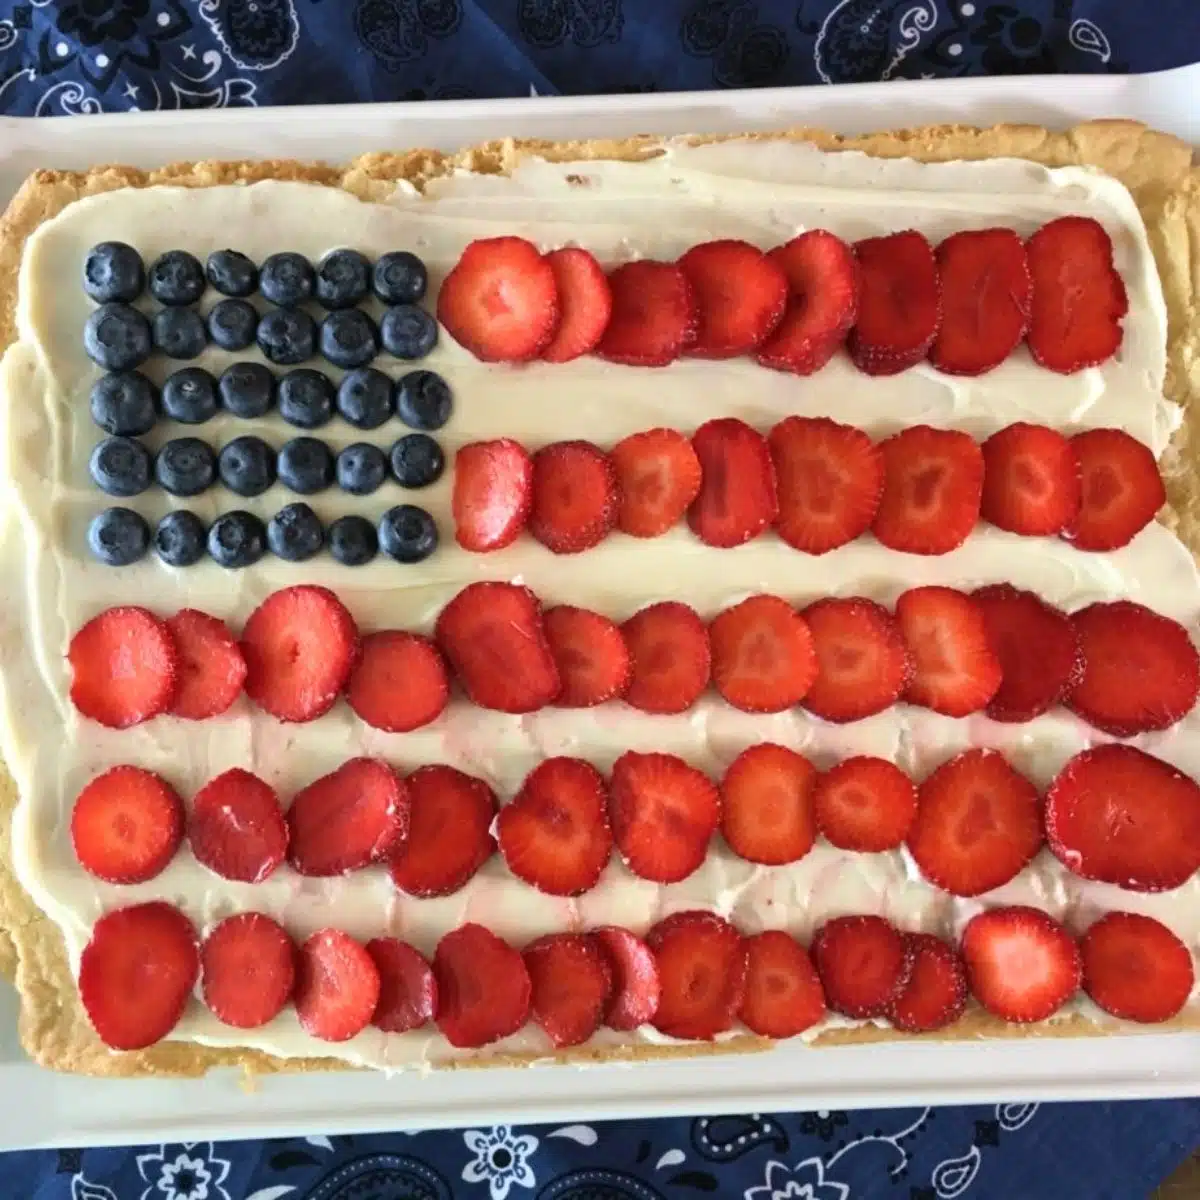 sugar cookie dough fruit pizza in the design of an American flag.